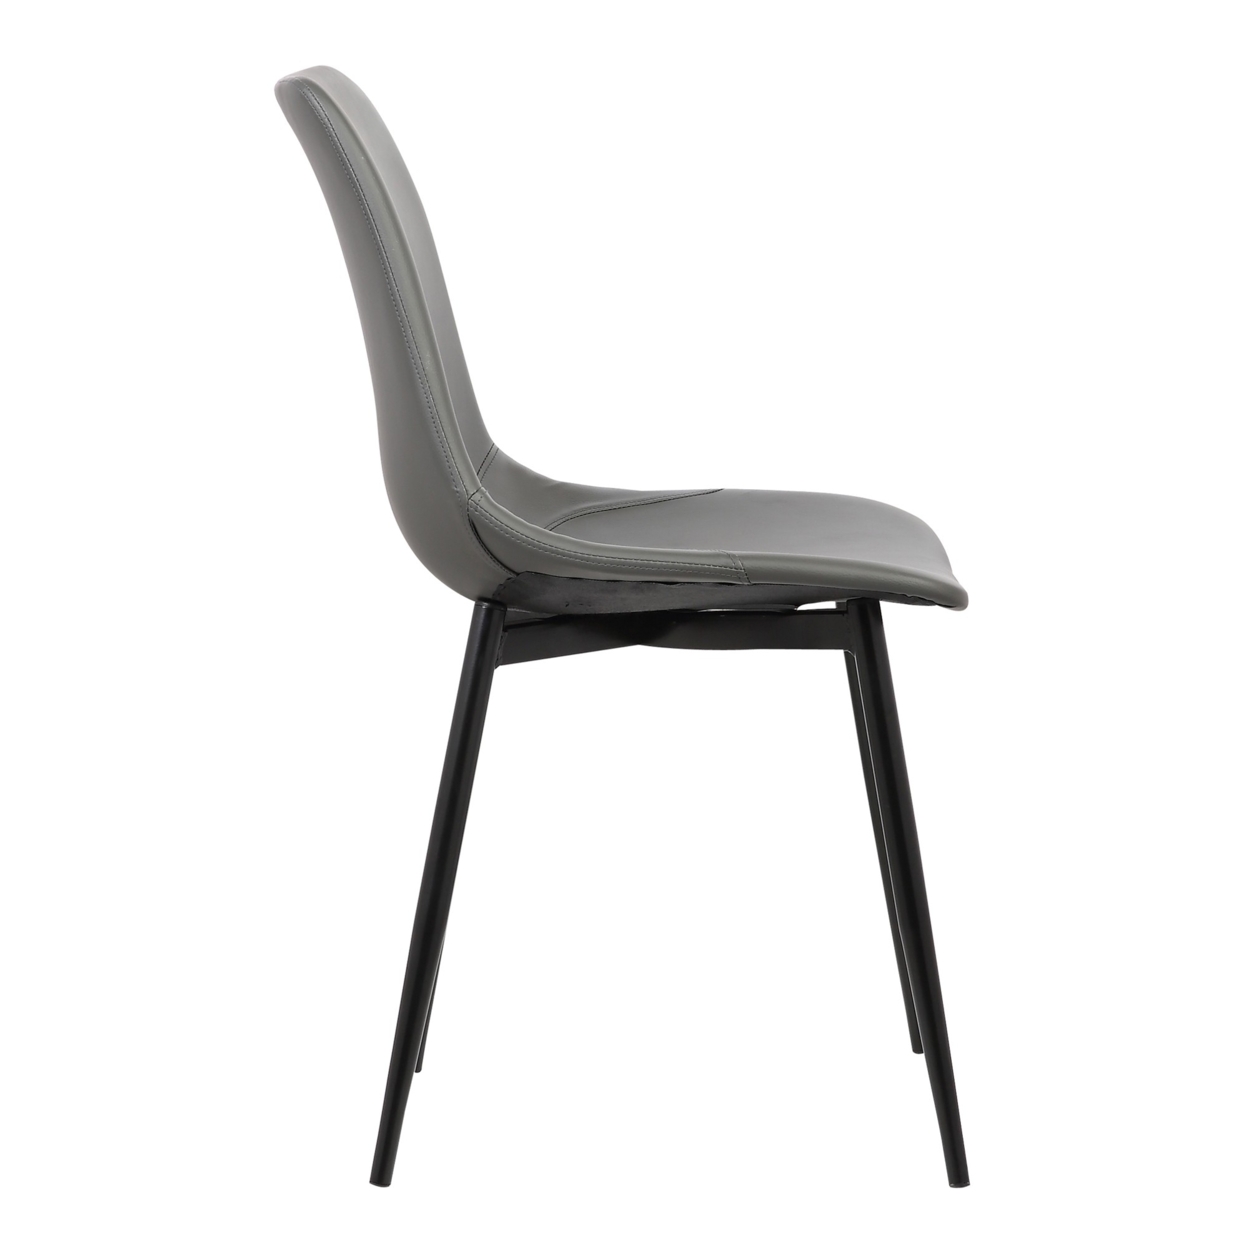 Leatherette Dining Chair With Bucket Seat And Metal Legs, Gray And Black- Saltoro Sherpi